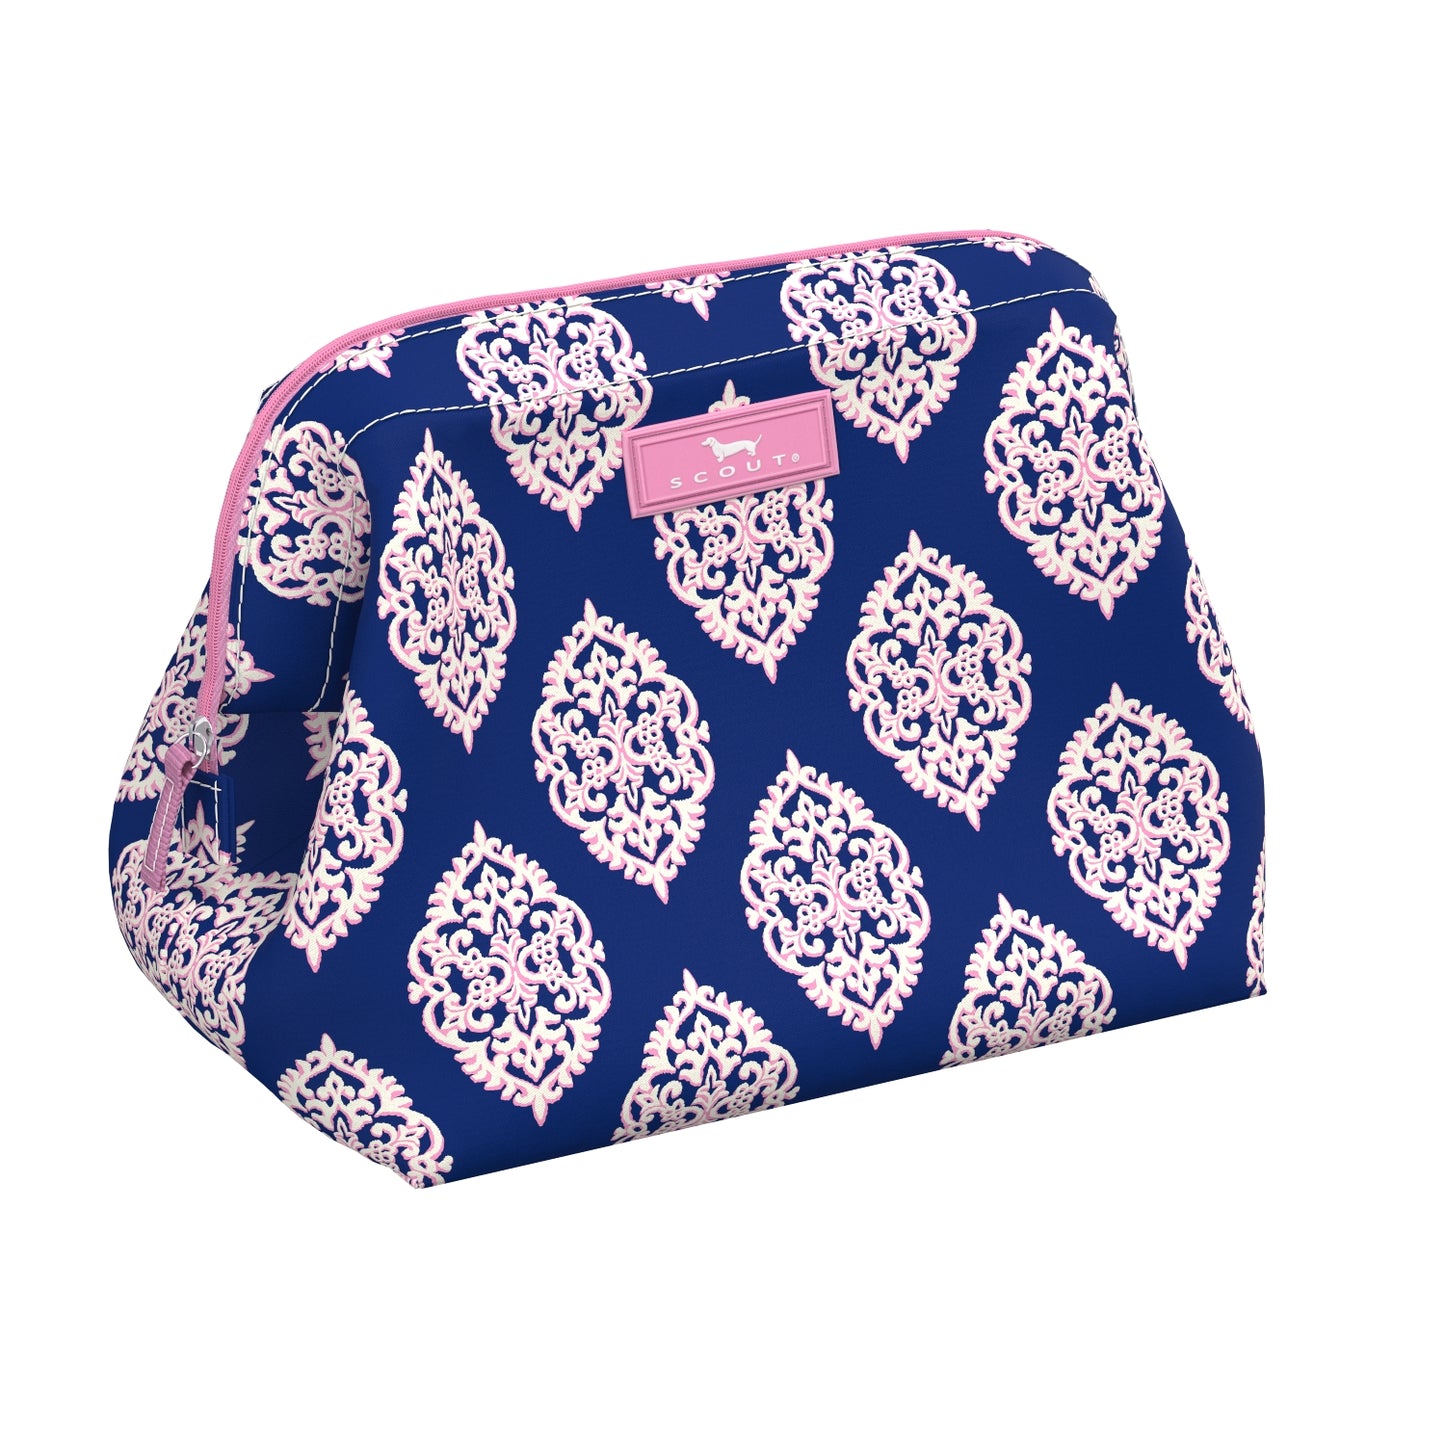 Little Big Mouth Toiletry Bag by Scout-